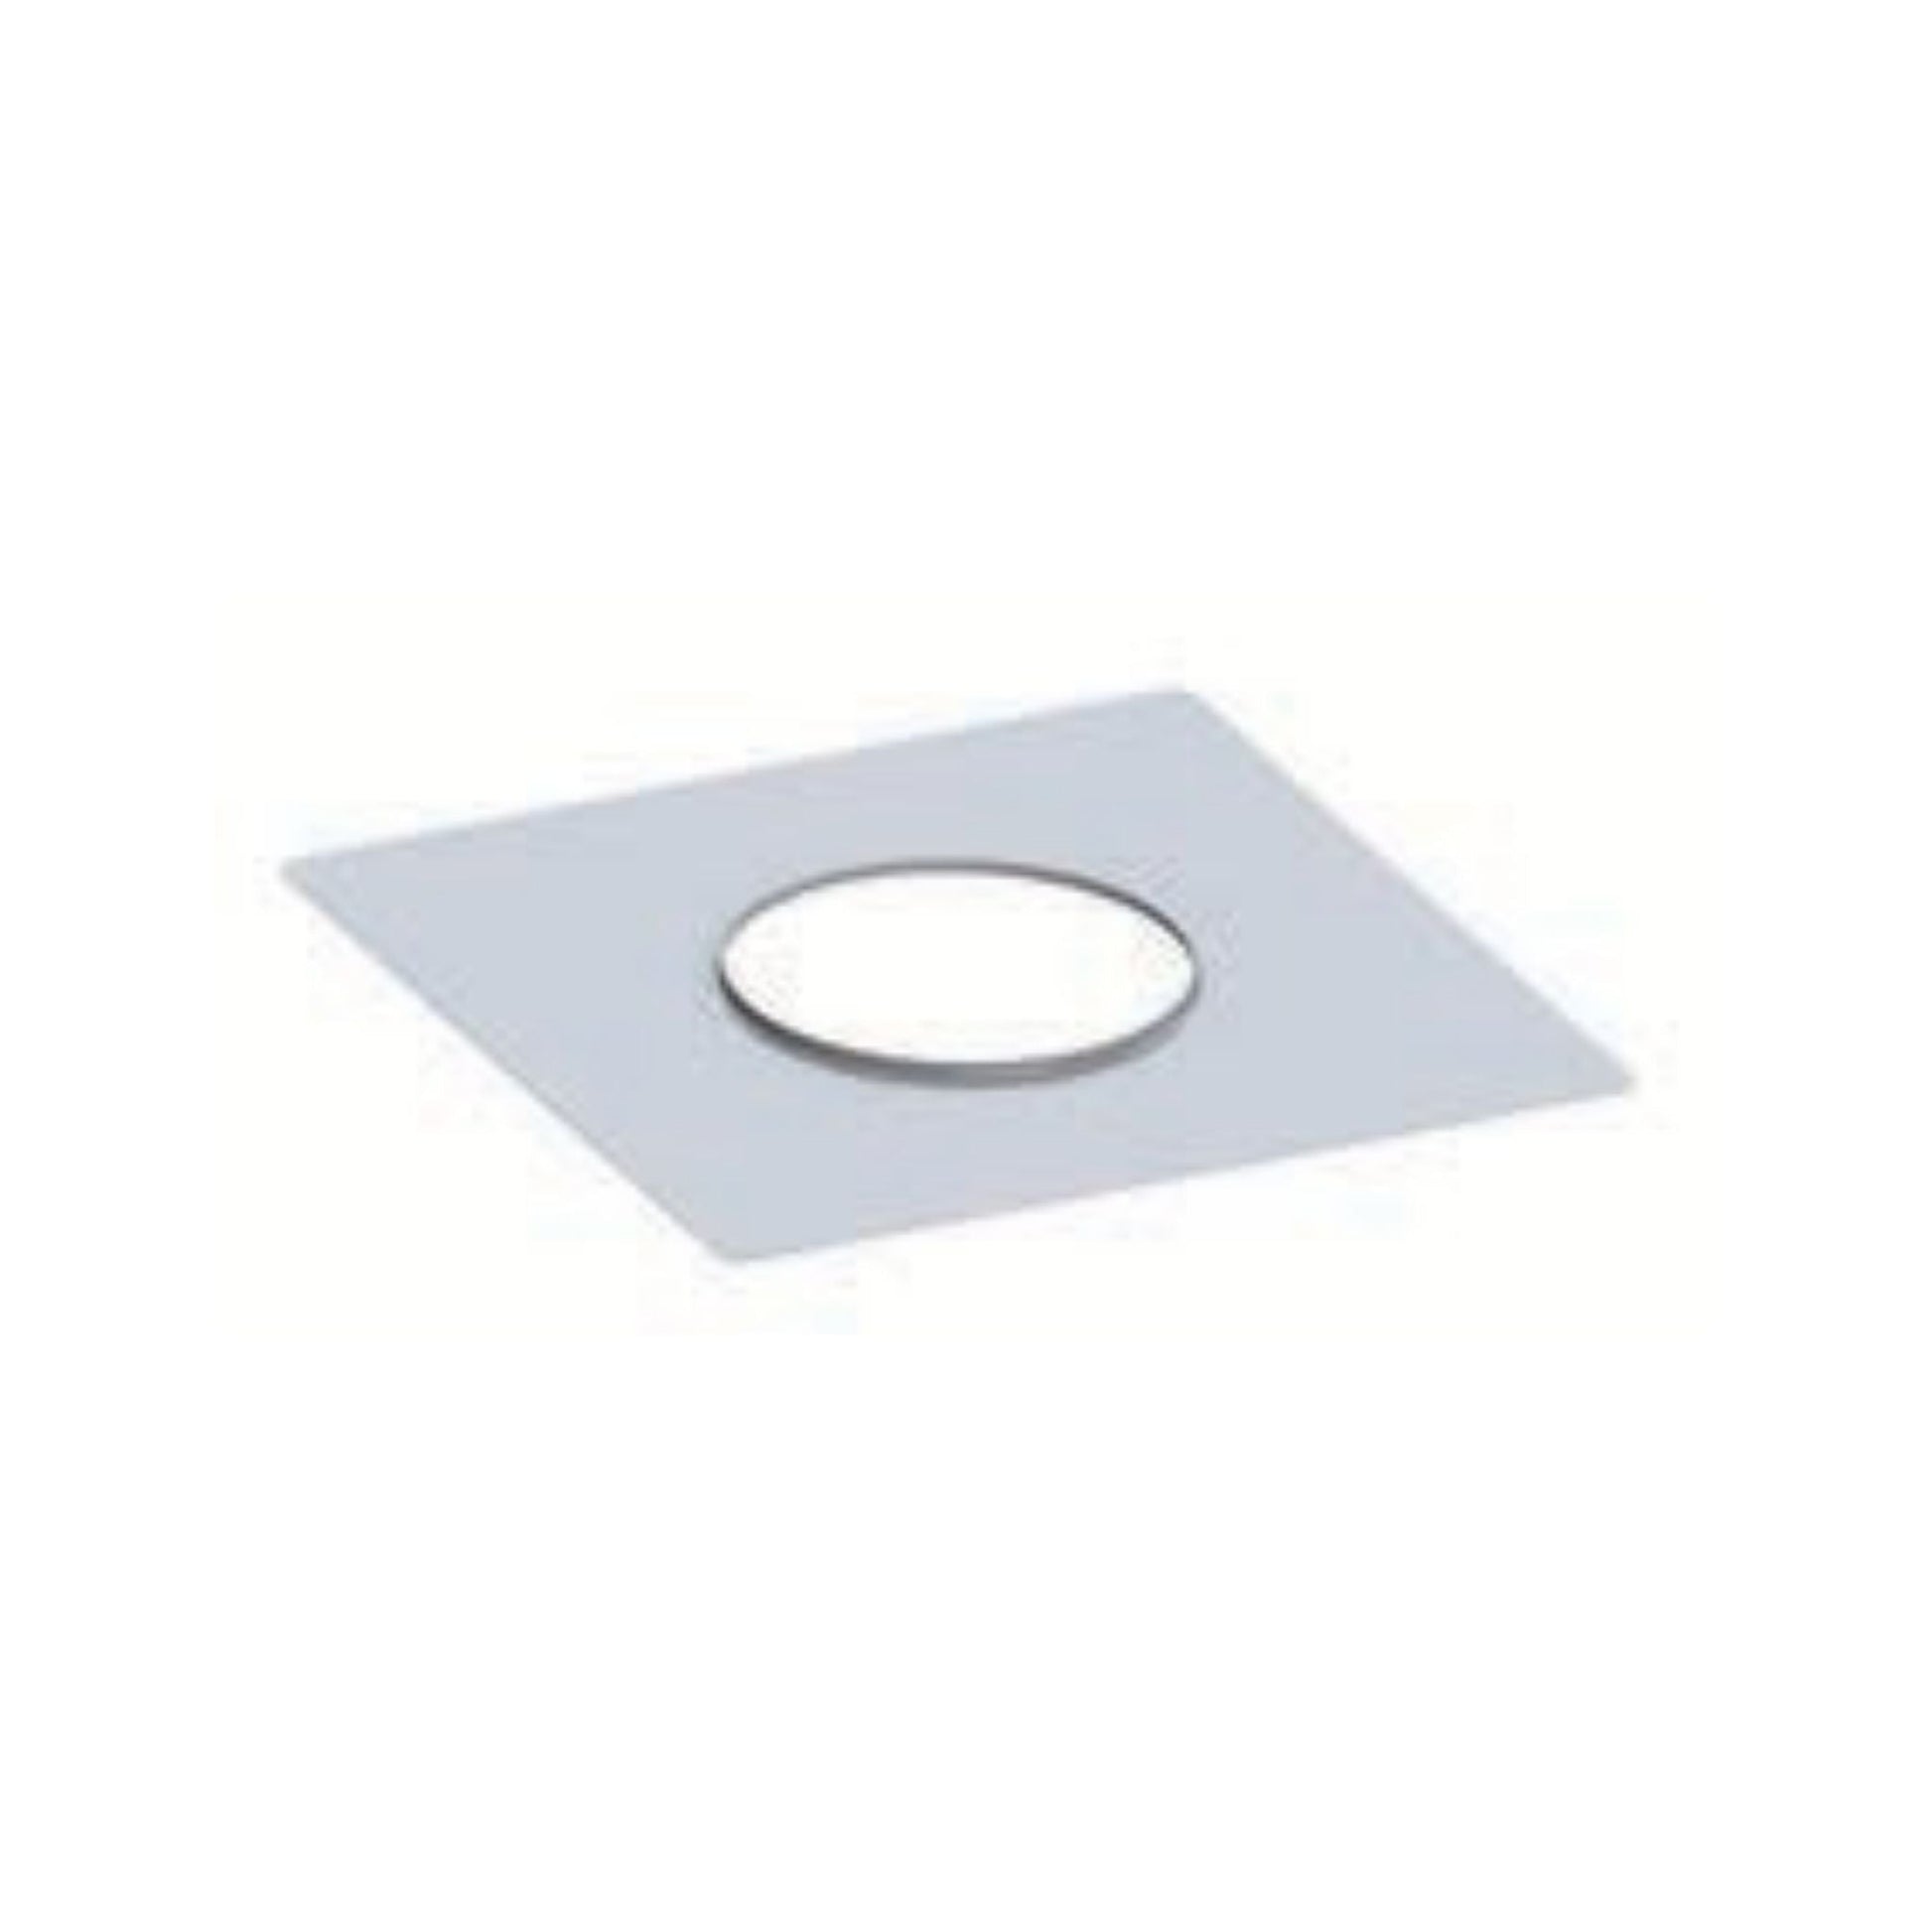 DuraVent FasNSeal Flex 4" Stainless Steel Top Cover Plate